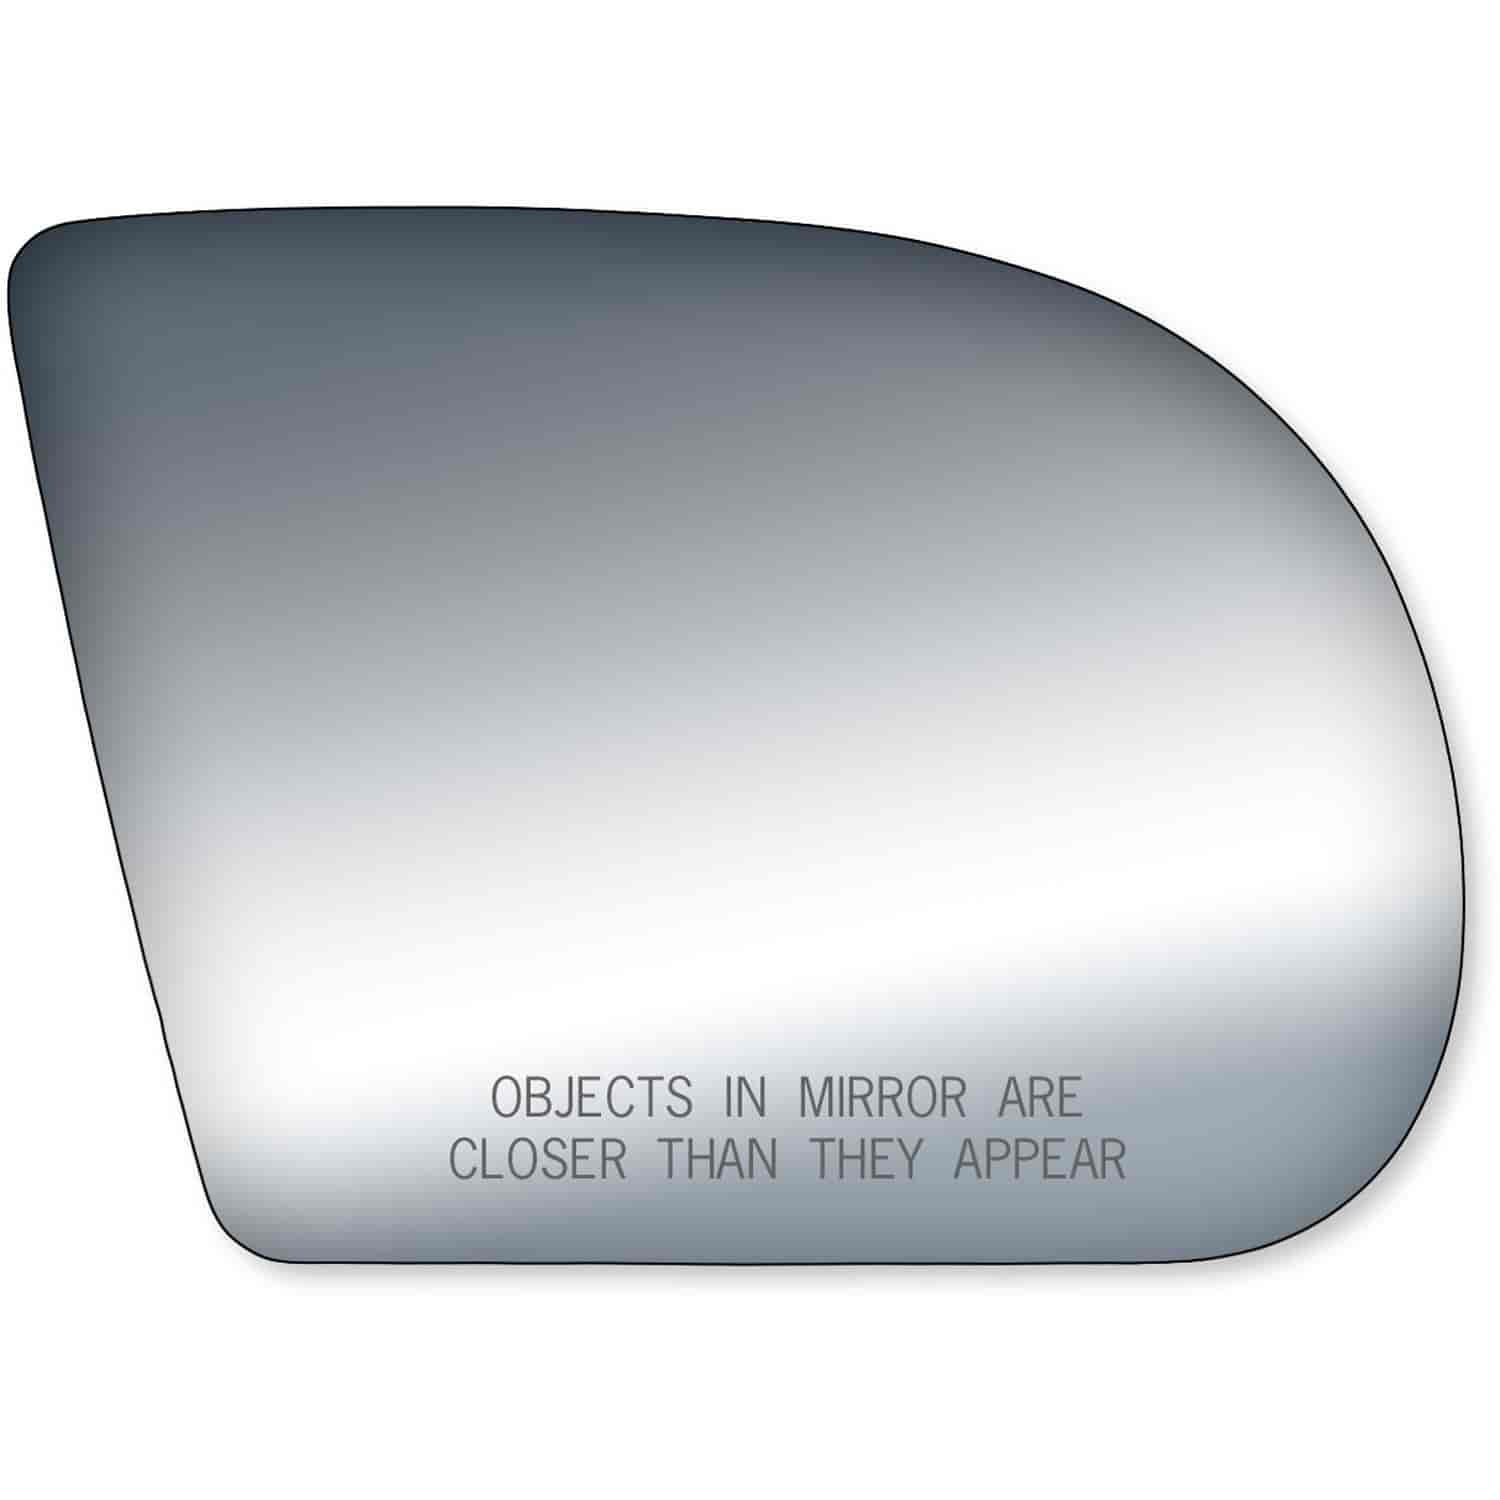 Replacement Glass for 99-05 Blazer Mid Size ;